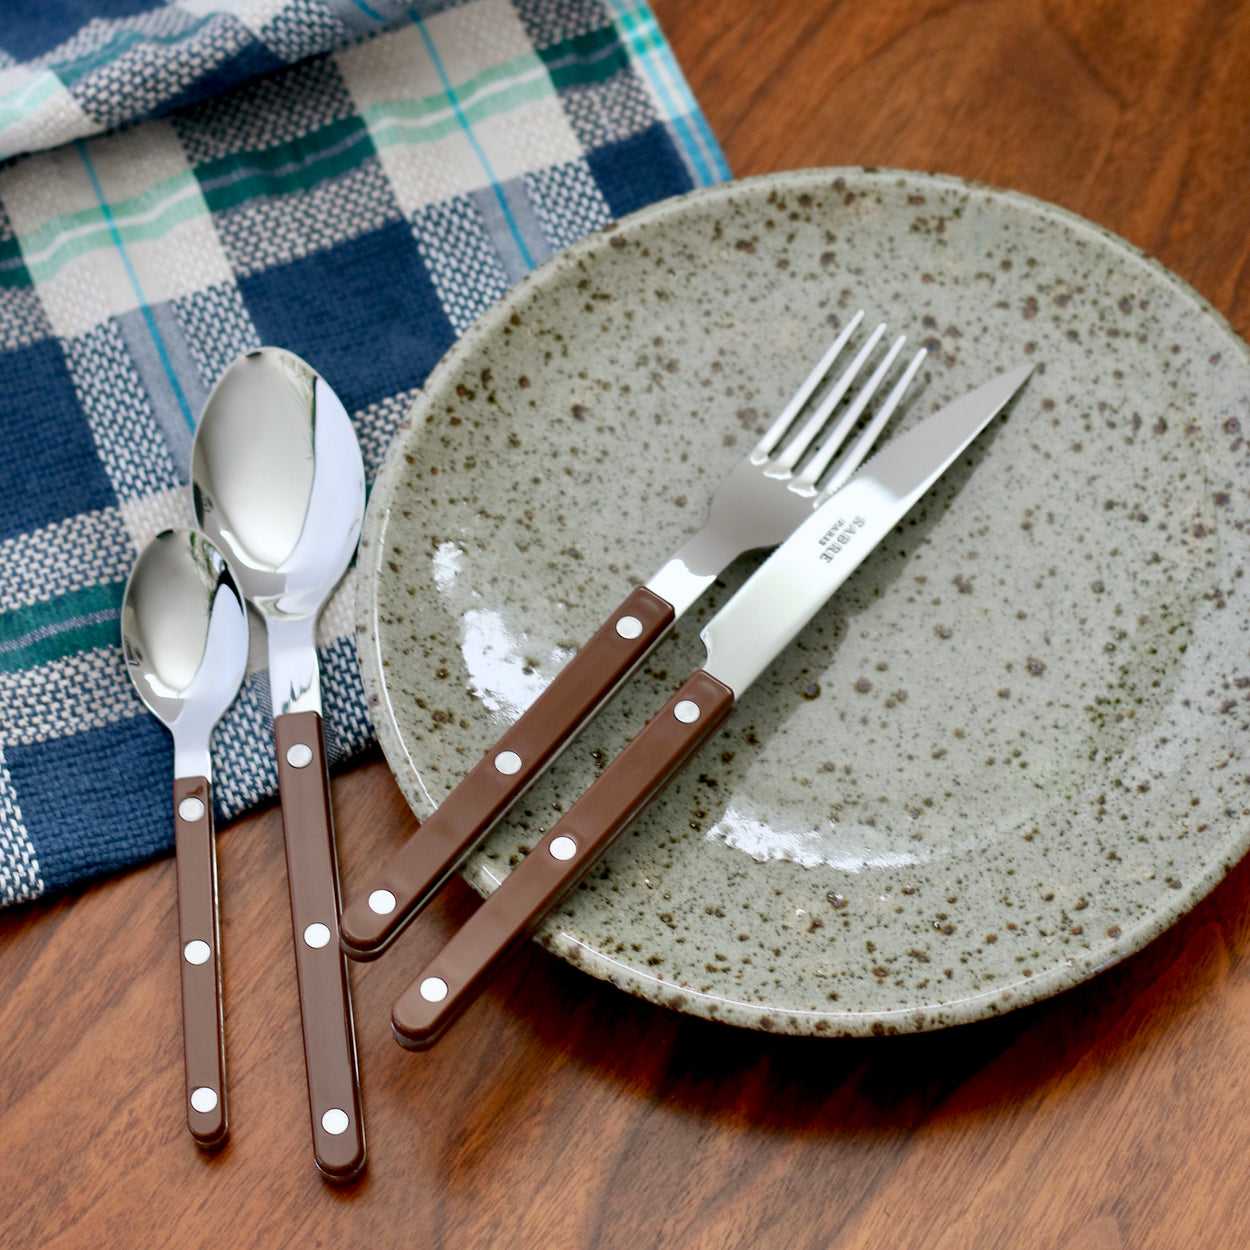 Sabre Paris Bistrot Chocolate Brown Cutlery 4 Piece Set on ceramic plate with blue napkin and wood table.